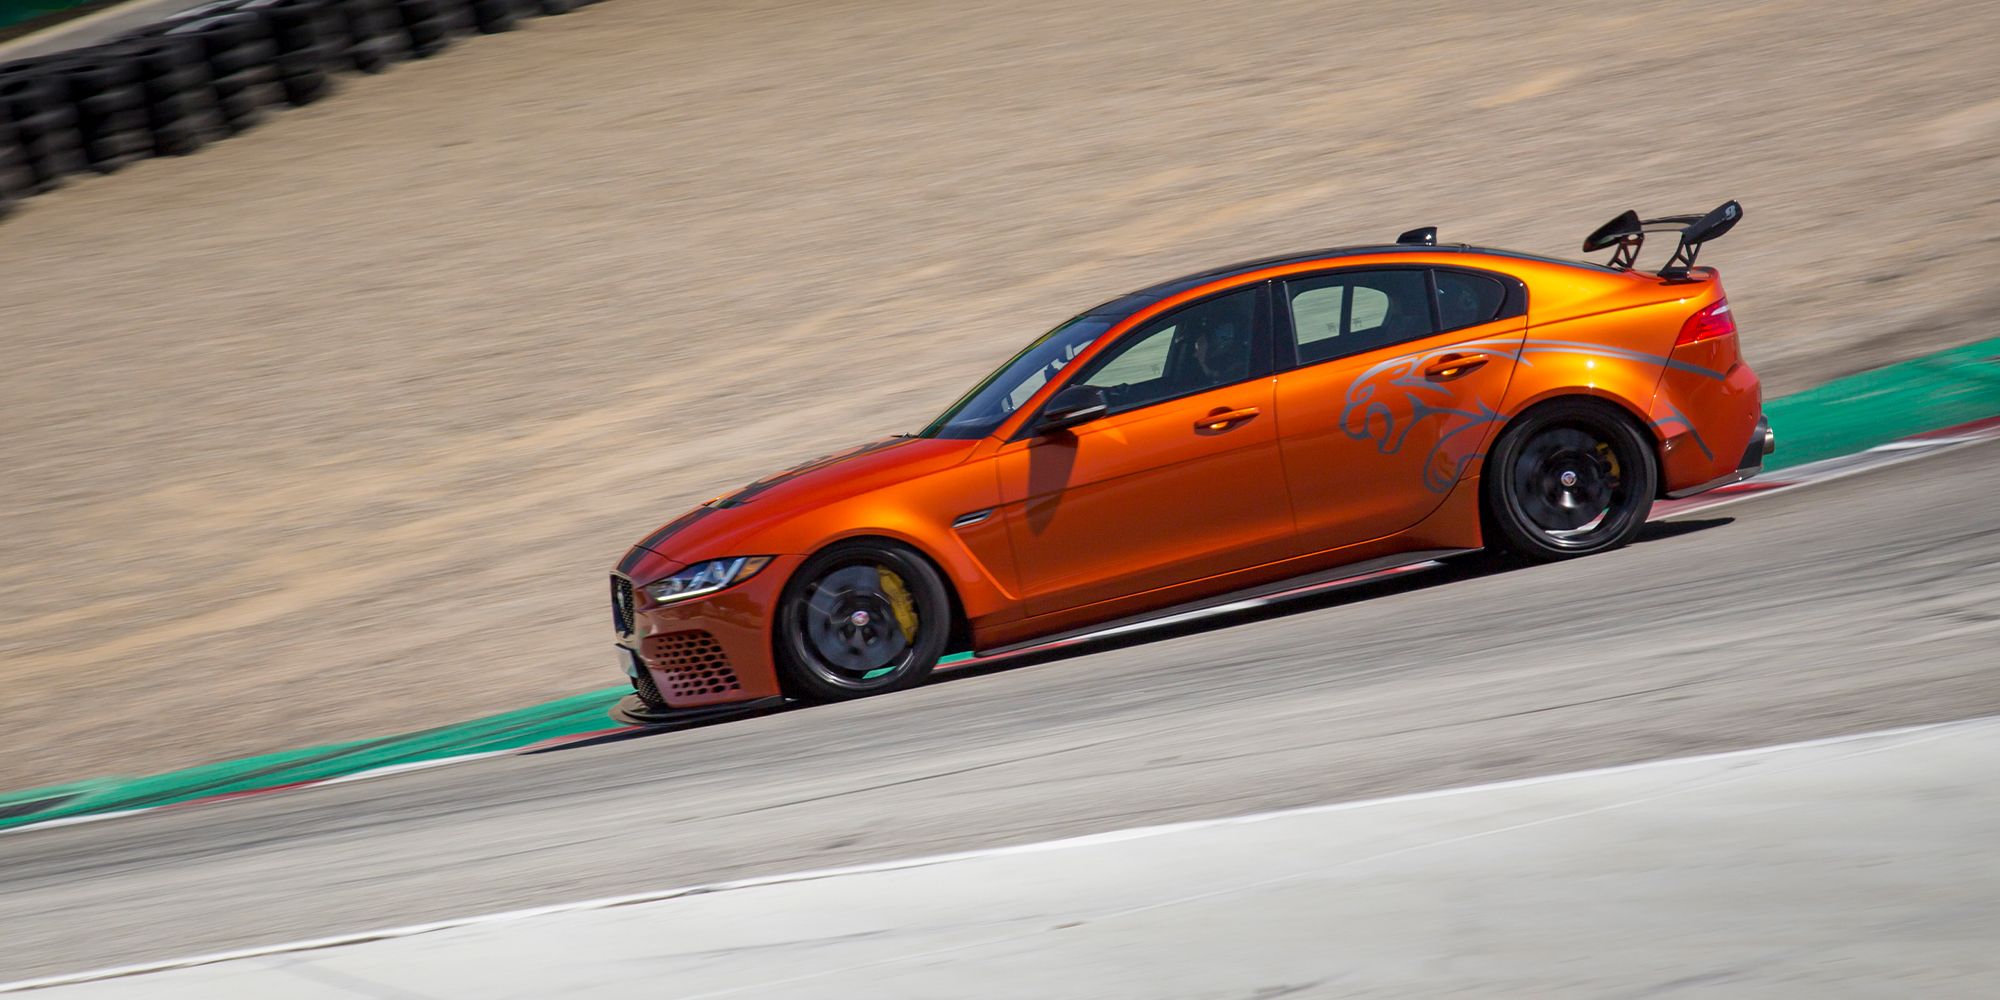 The XE SV Project 8 cornering hard